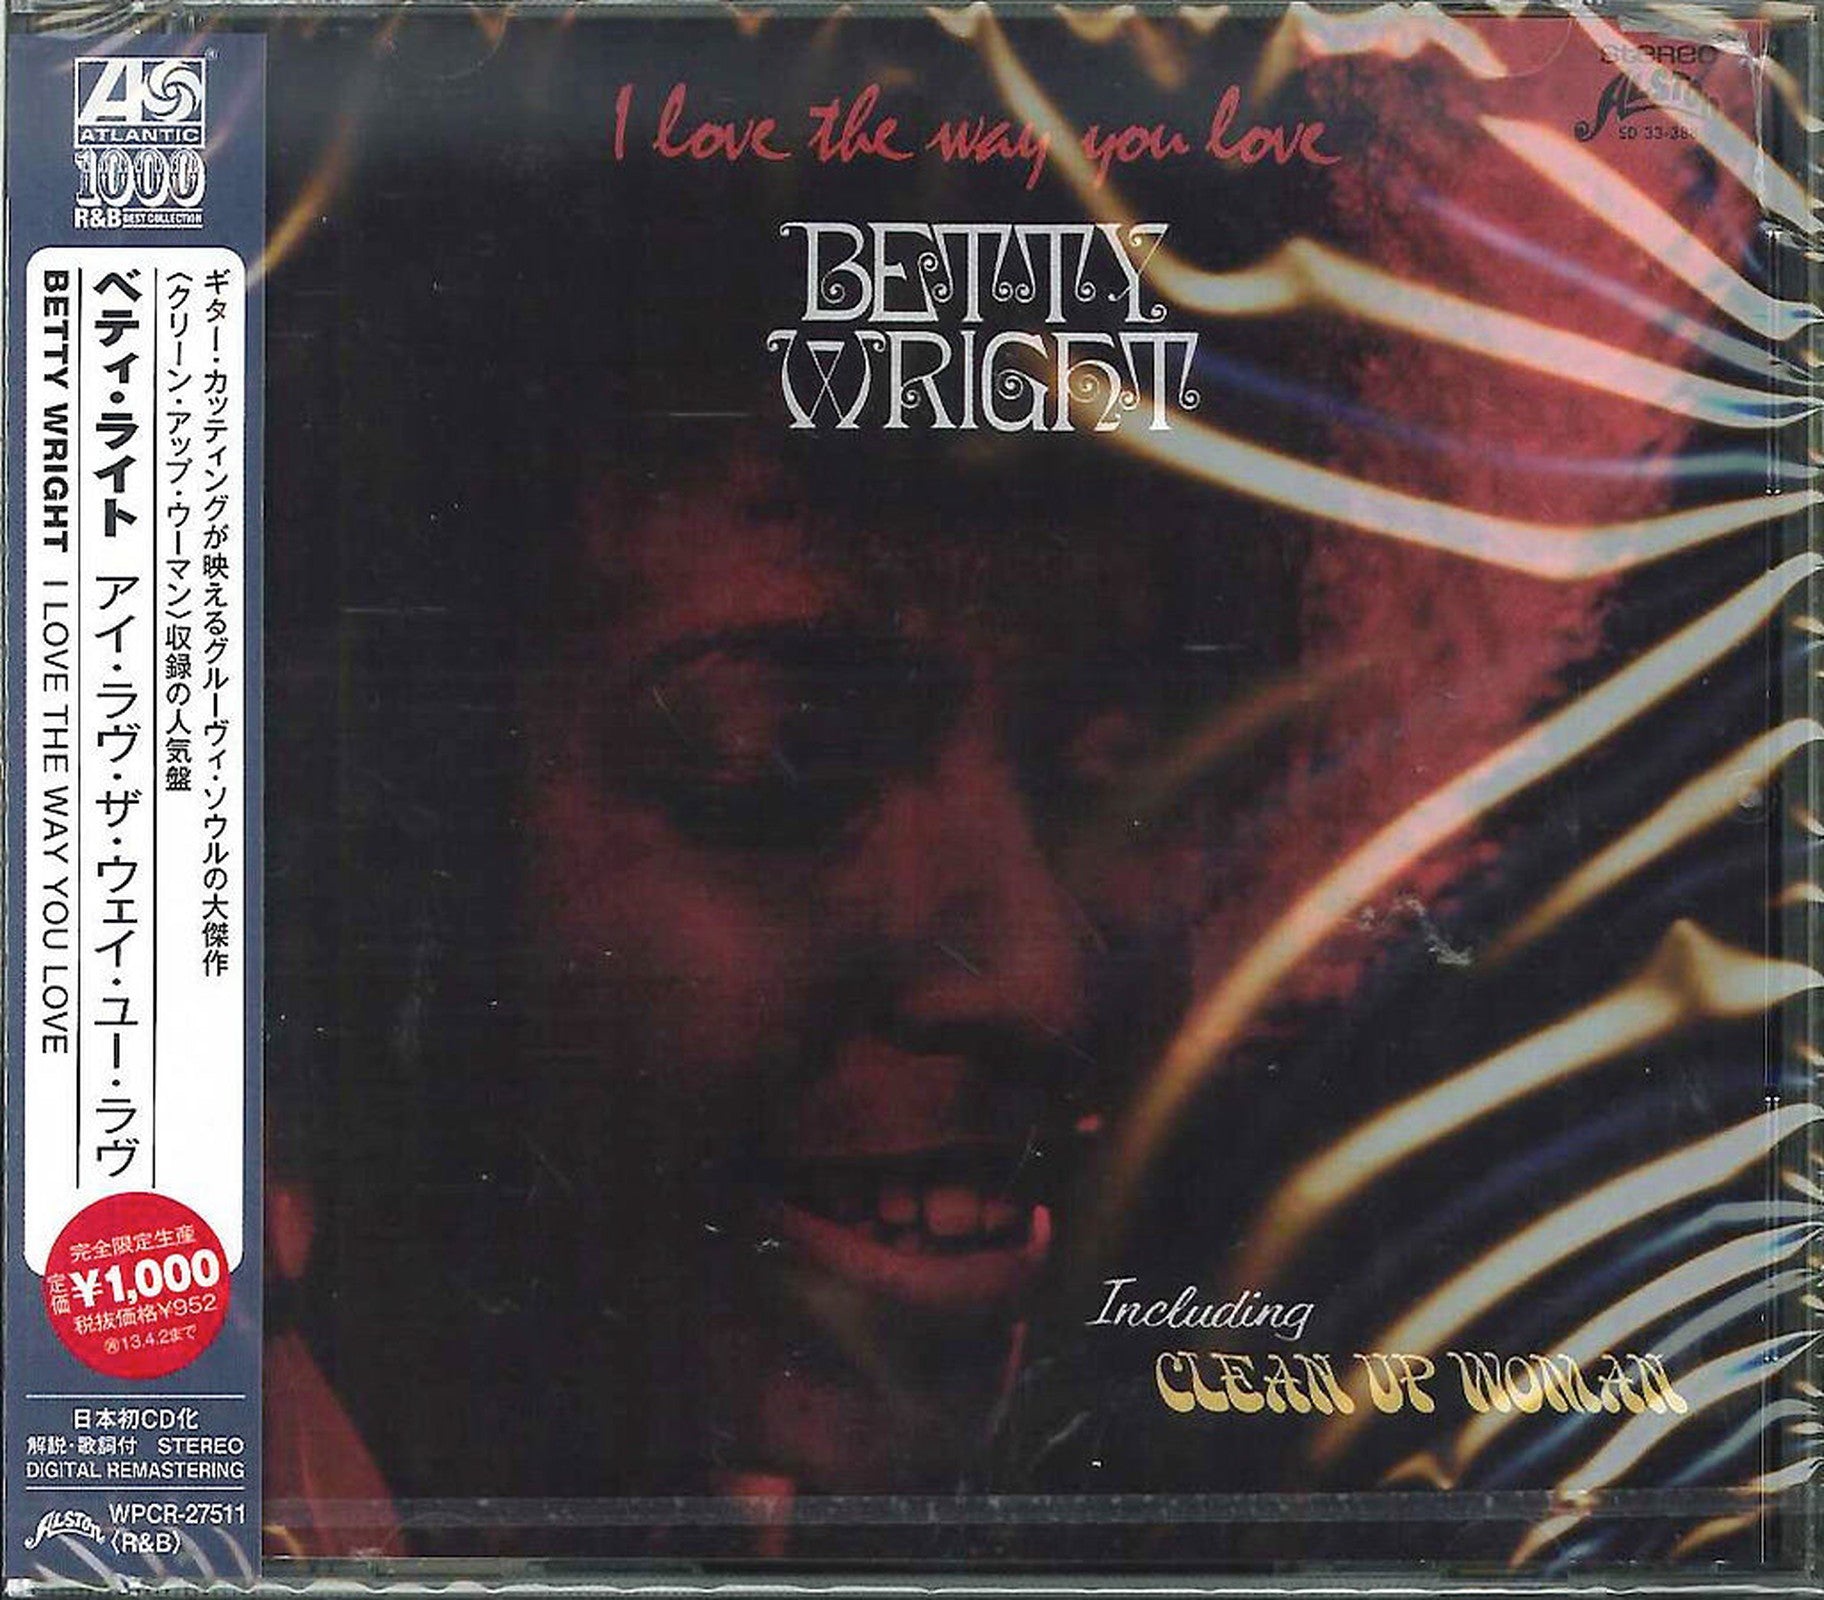 Betty Wright - I Love The Way You Love - Japan CD Limited Edition